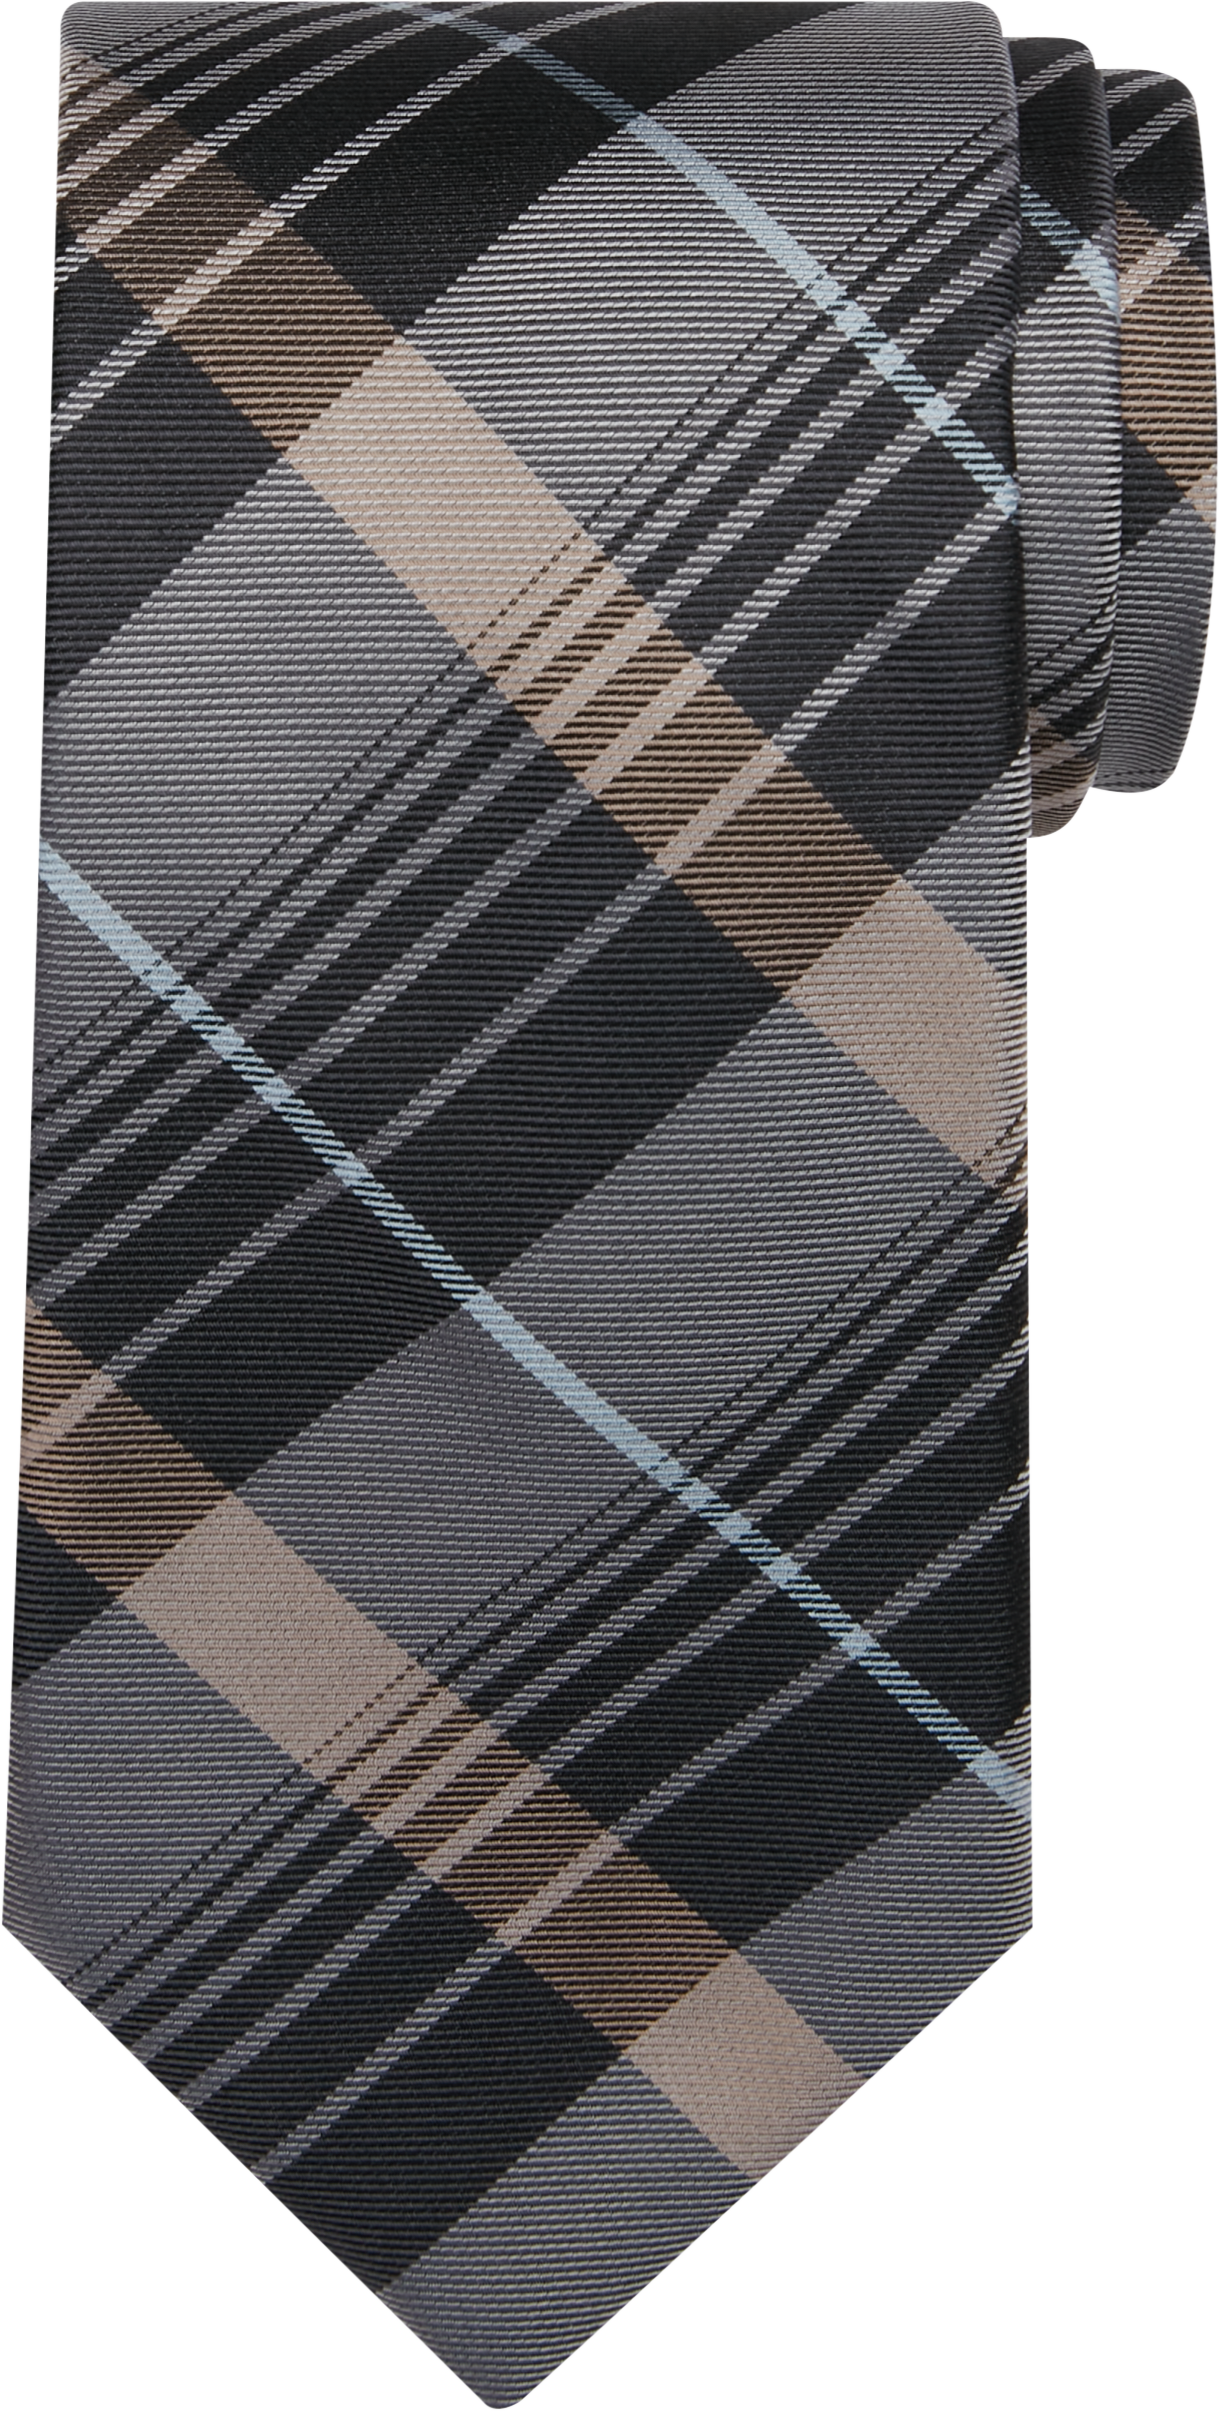 Awearness Kenneth Cole Narrow Tie, Charcoal Plaid - Men's Featured | Men's  Wearhouse